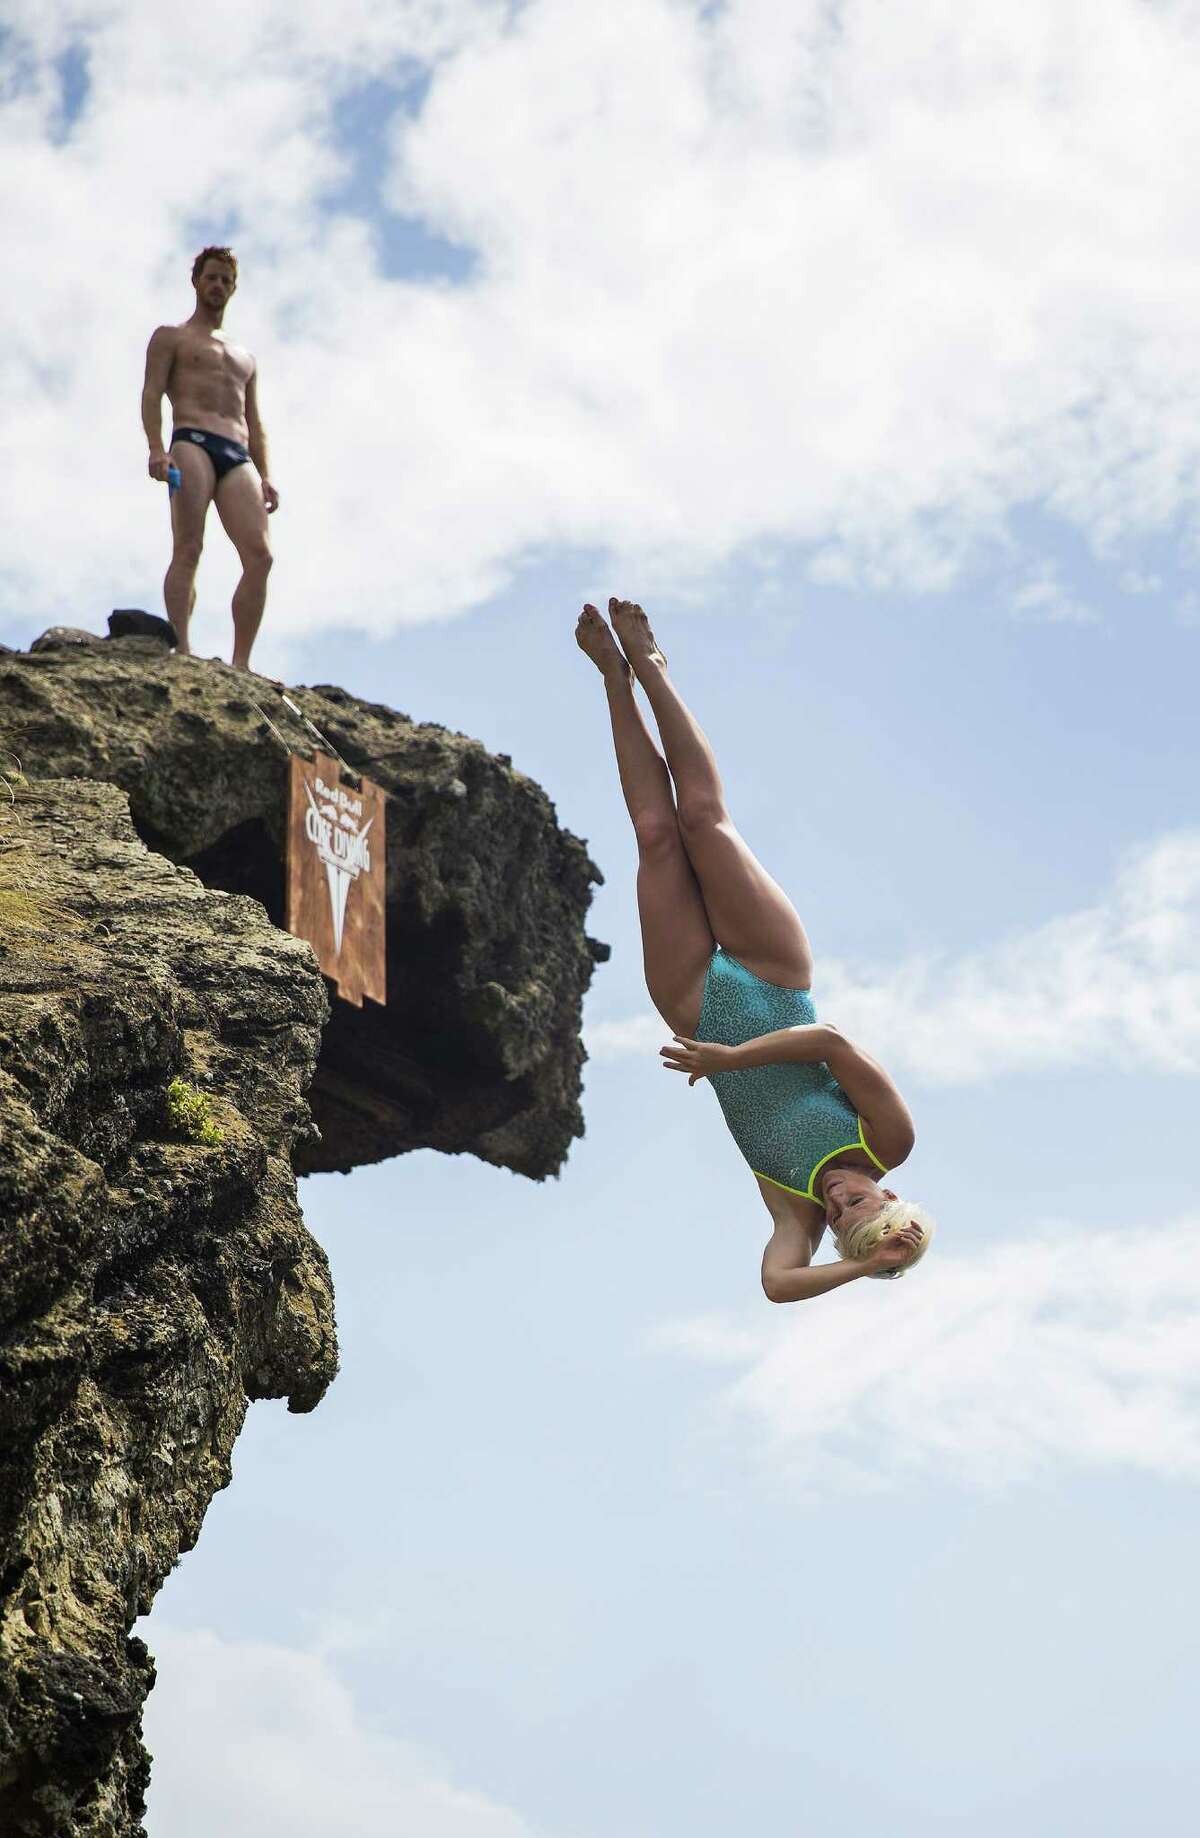 In this handout image provided by Red Bull, Rachelle Simpson of the USA dives from the 20 meter platform during the fifth stop of the Red Bull Cliff Diving World Series on July 18, 2015 in Islet Franca do Campo, Azores, Portugal.